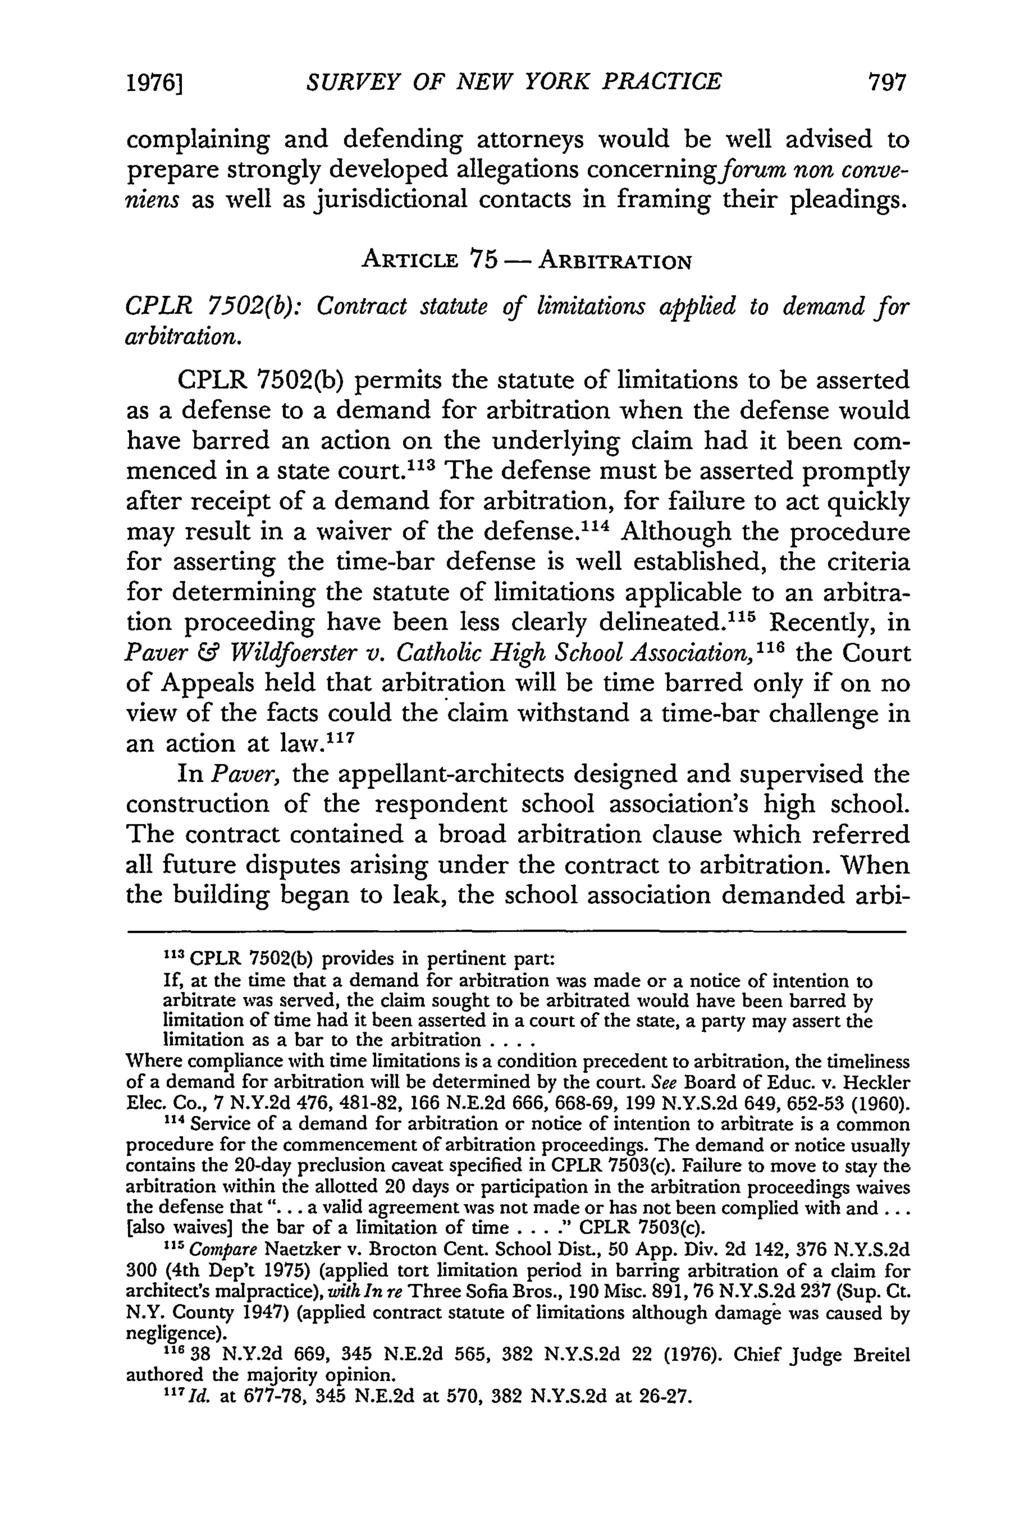 1976] SURVEY OF NEW YORK PRACTICE complaining and defending attorneys would be well advised to prepare strongly developed allegations concerningforum non conveniens as well as jurisdictional contacts